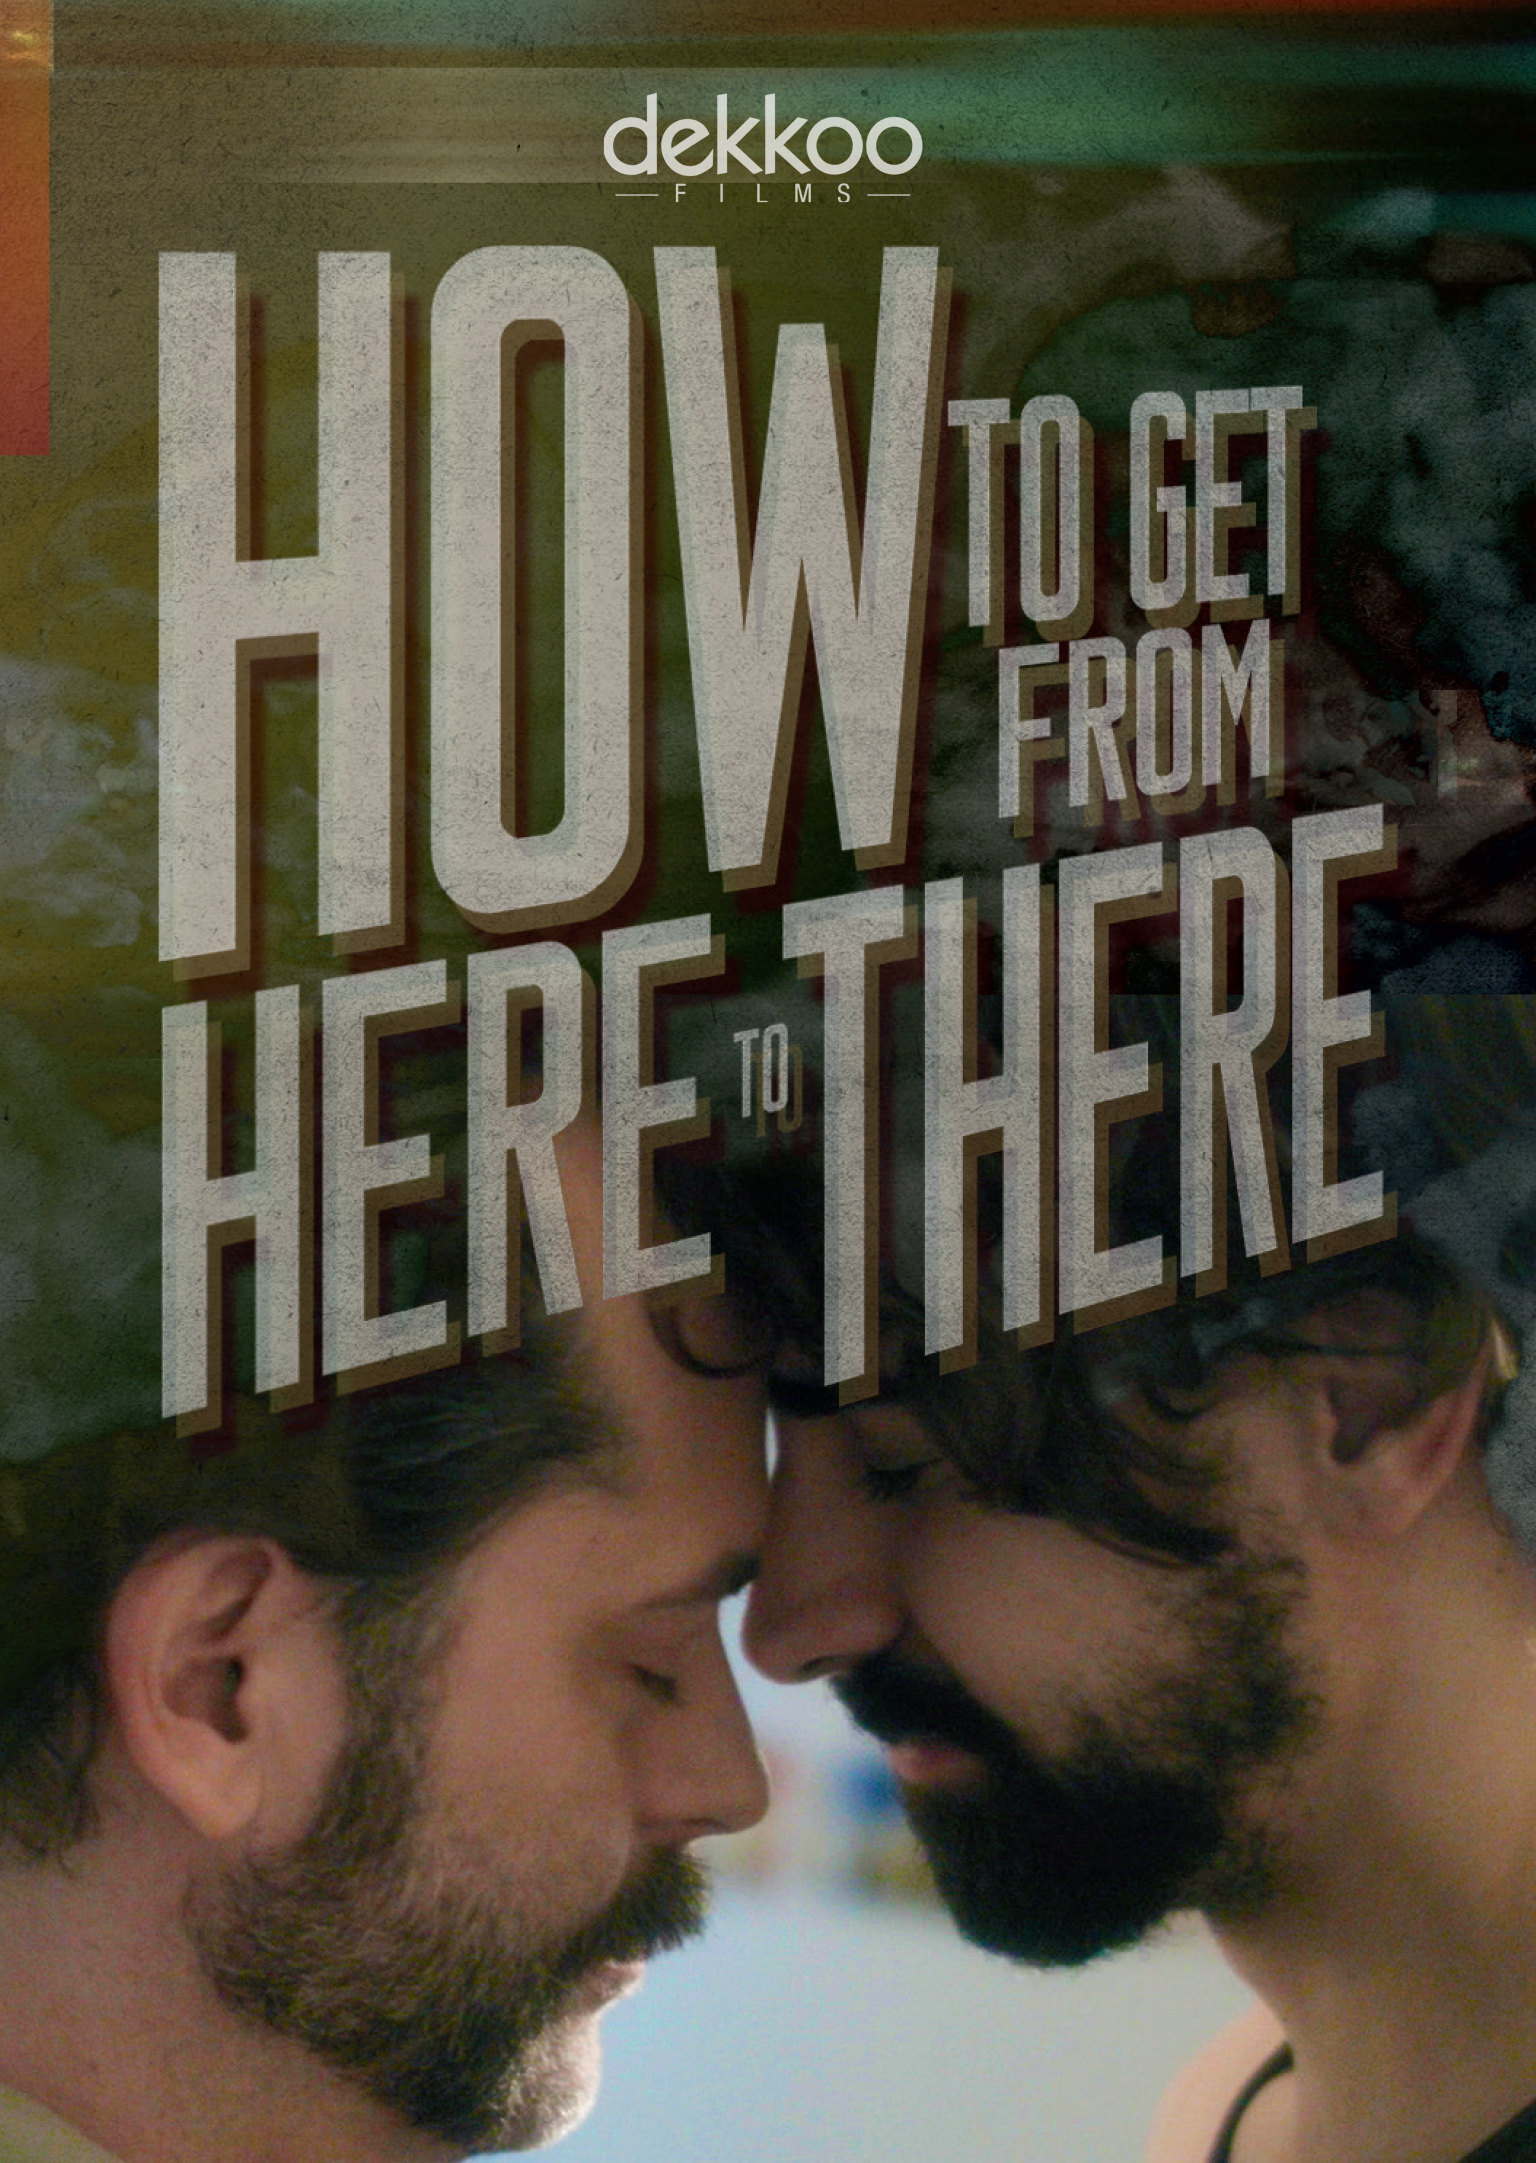 How to Get from Here to There (2019)